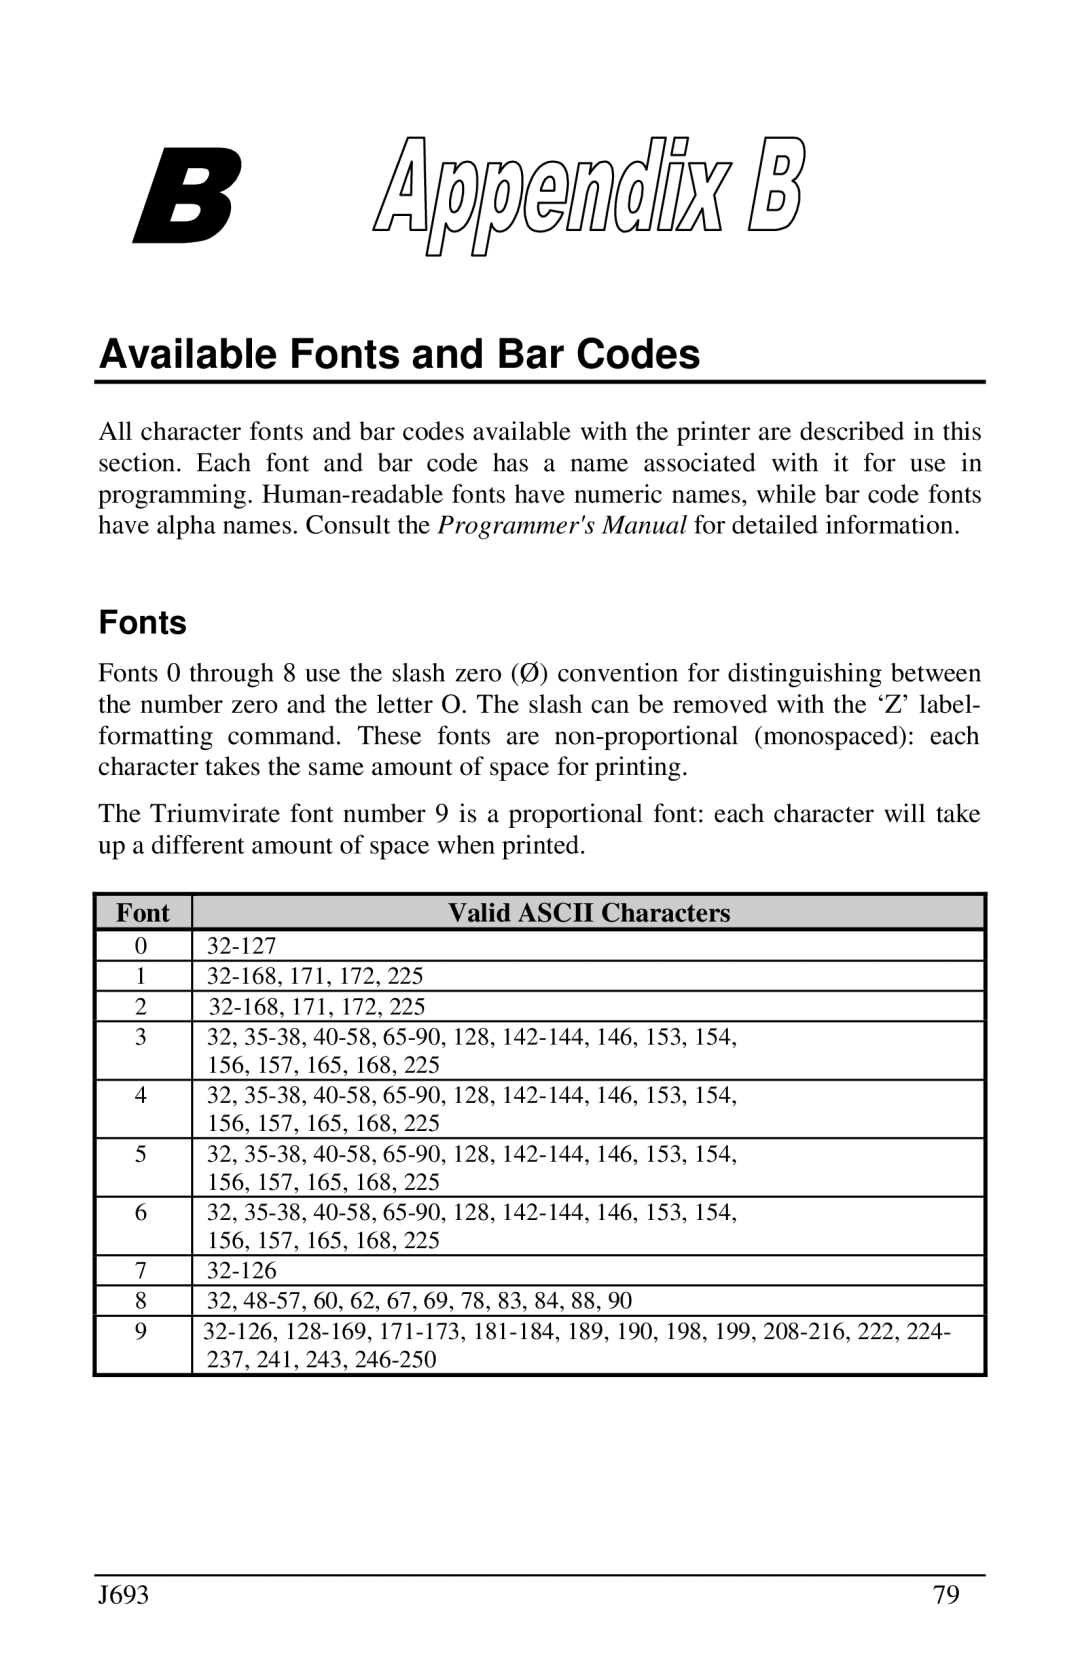 Pitney Bowes J693 manual Available Fonts and Bar Codes, Valid ASCII Characters 